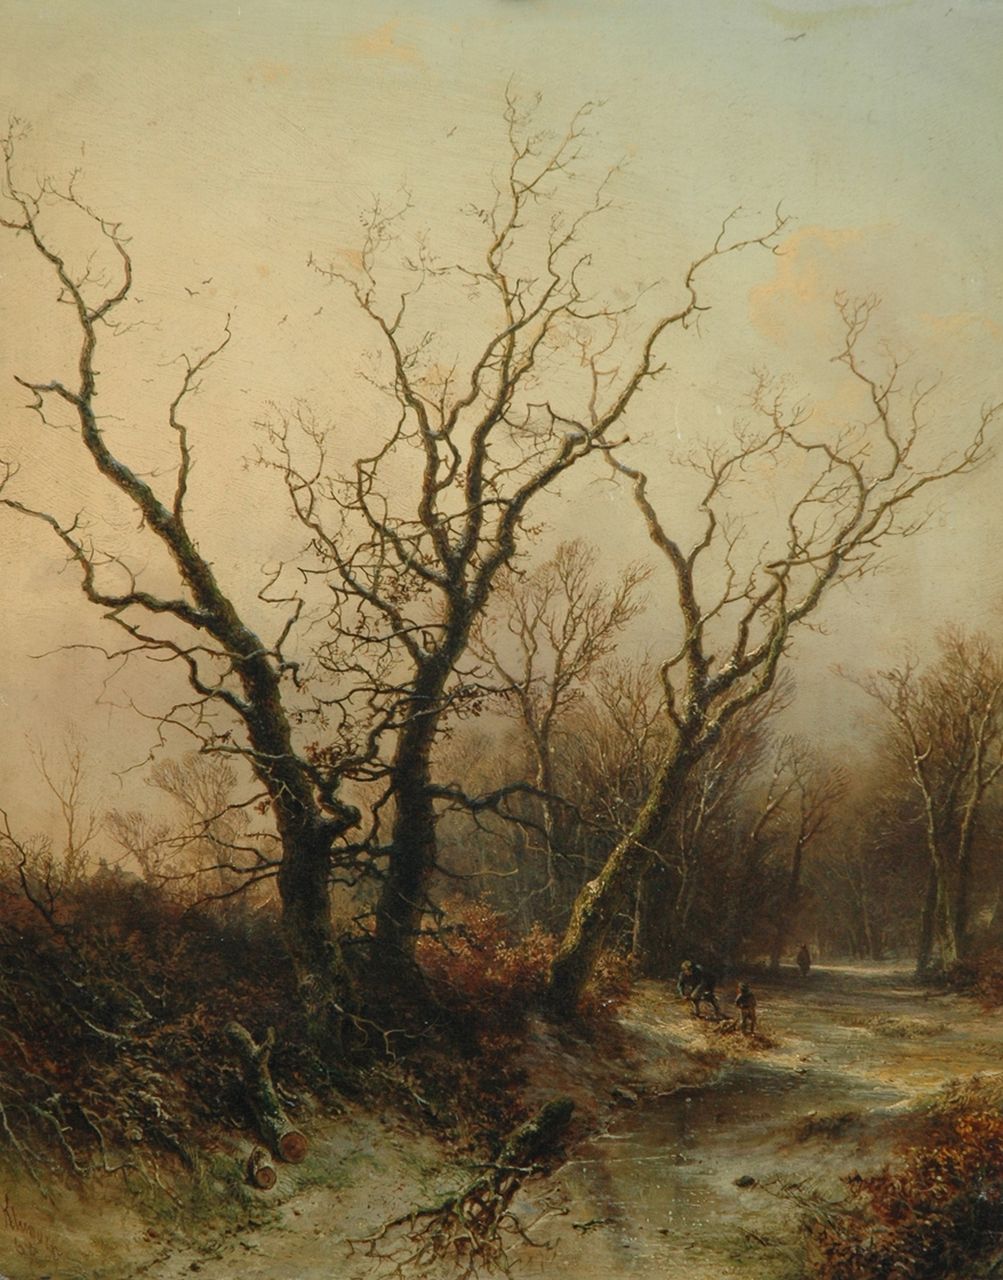 Kluyver P.L.F.  | 'Pieter' Lodewijk Francisco Kluyver, A winter landscape with wood gatherers, Öl auf Holz 54,2 x 43,0 cm, signed l.l. und dated '68